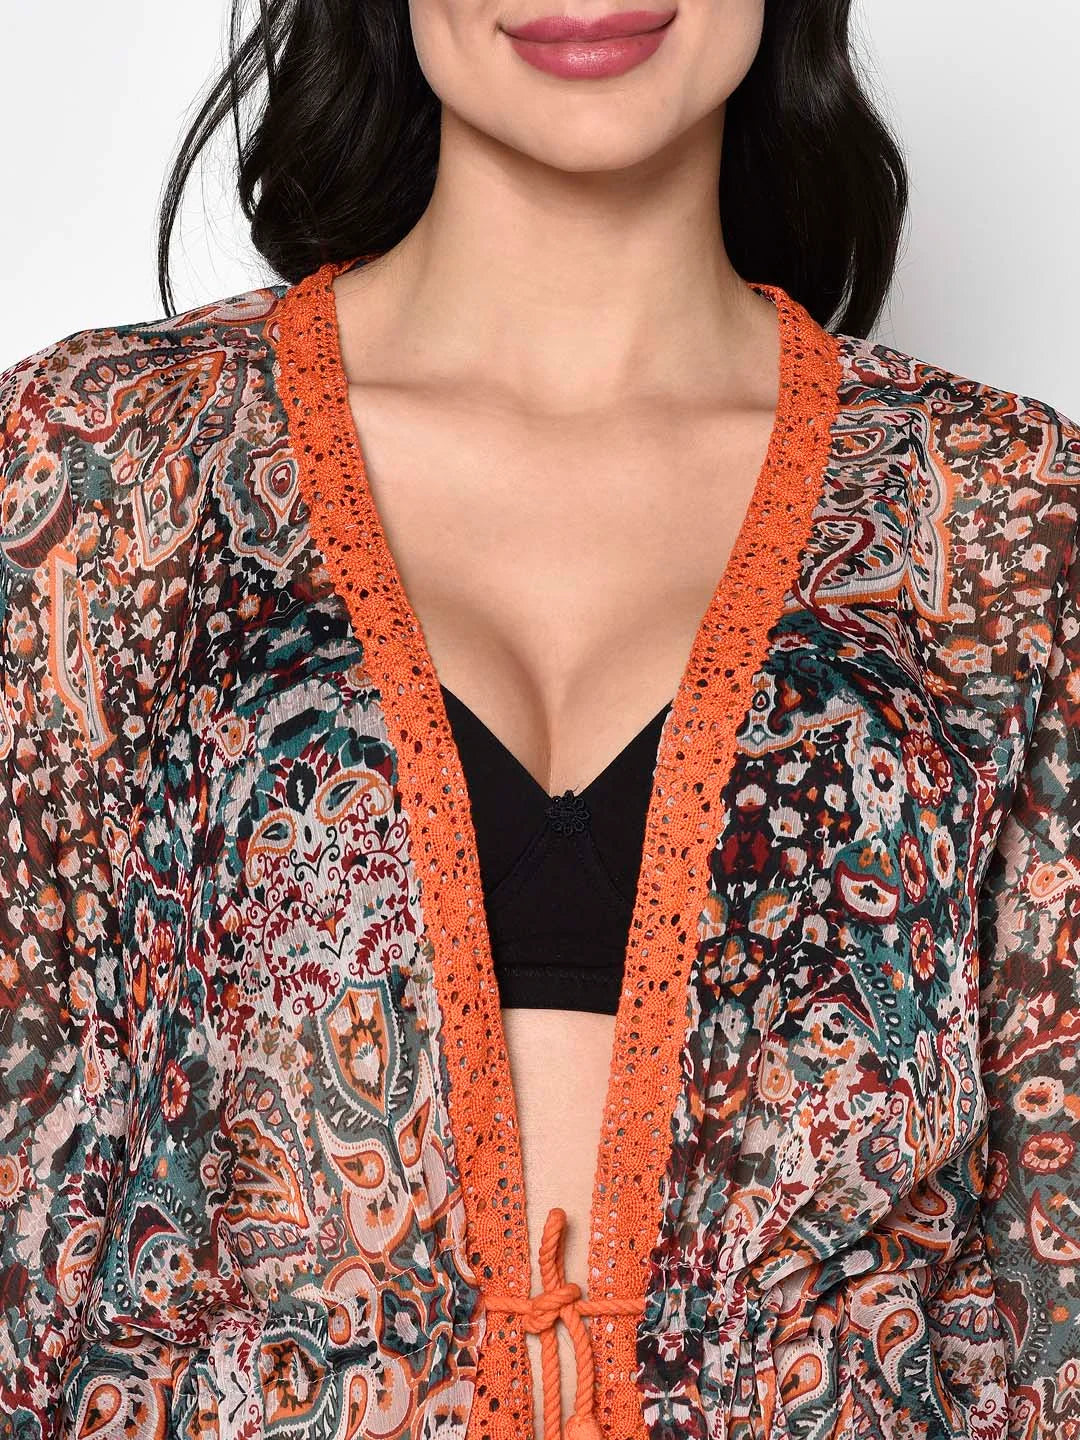 Printed Lacey Cover-Up Swim Dress - Da Intimo - Lingerie Online Store India